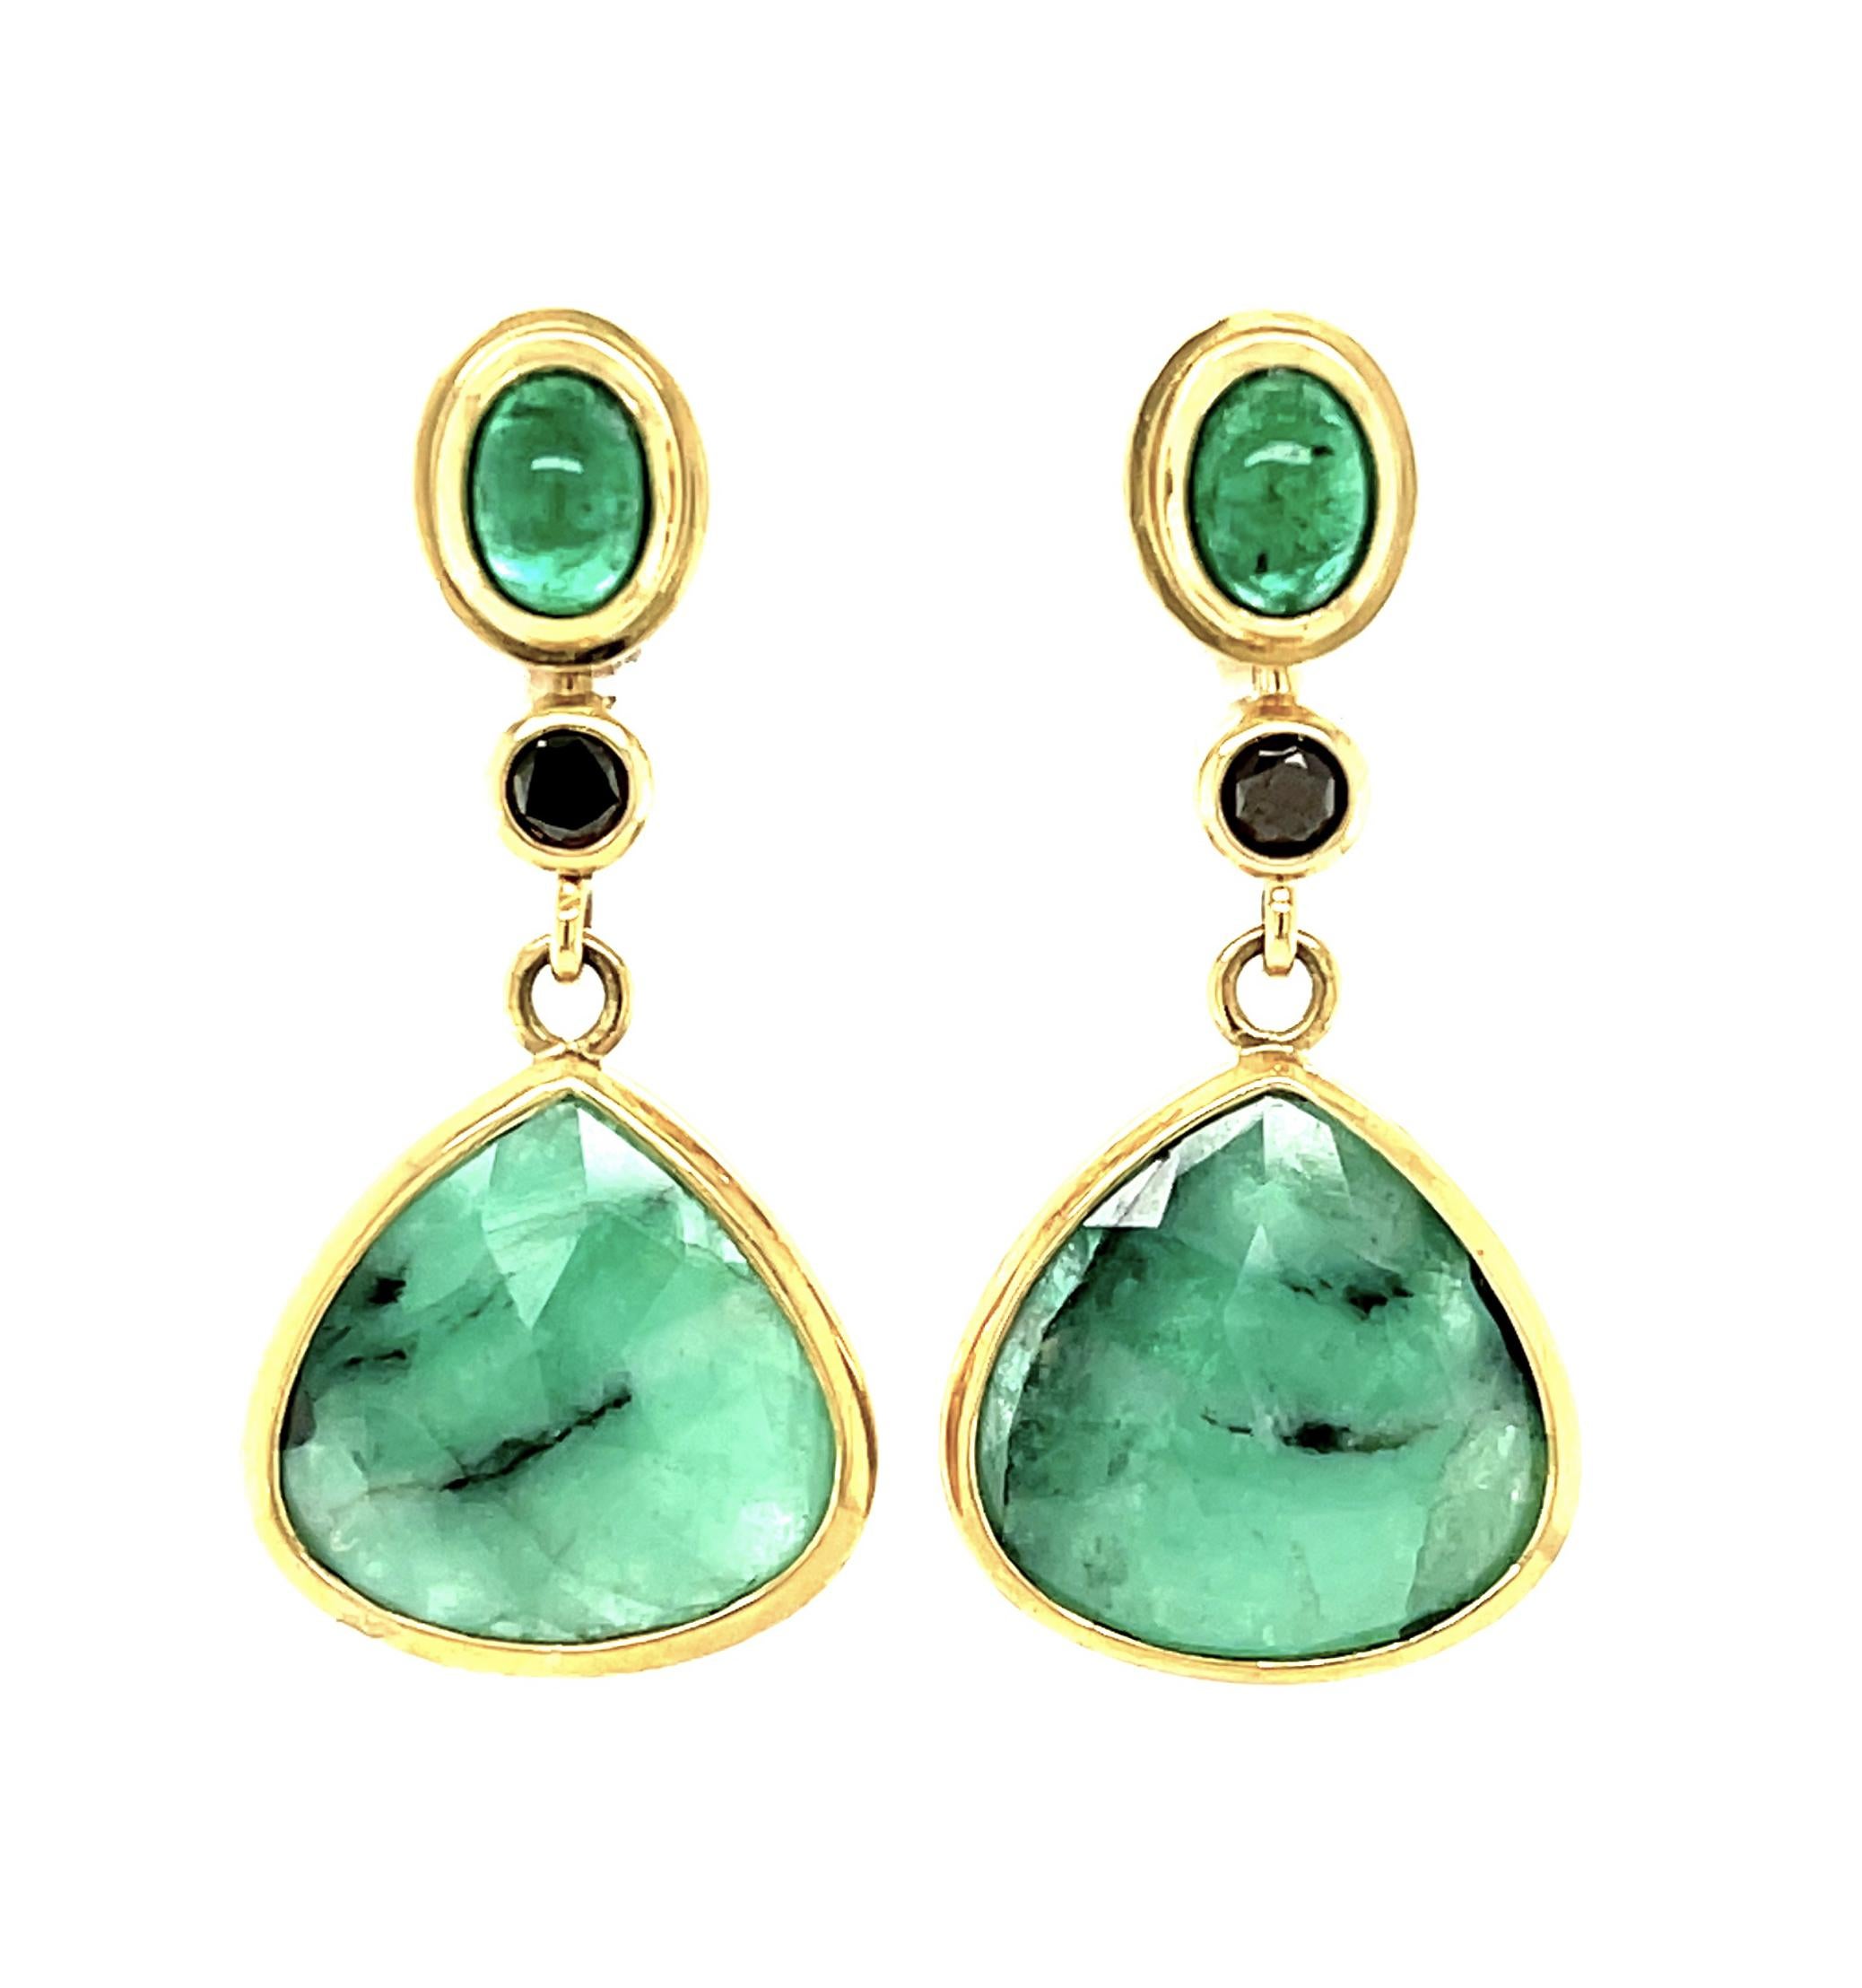 These fun emerald earrings are sure to be your new favorites! The bright green, pear shaped drops have been faceted to reflect light and show off their gorgeous hue. Matching oval cabochons and dramatic black diamonds highlight the striking color